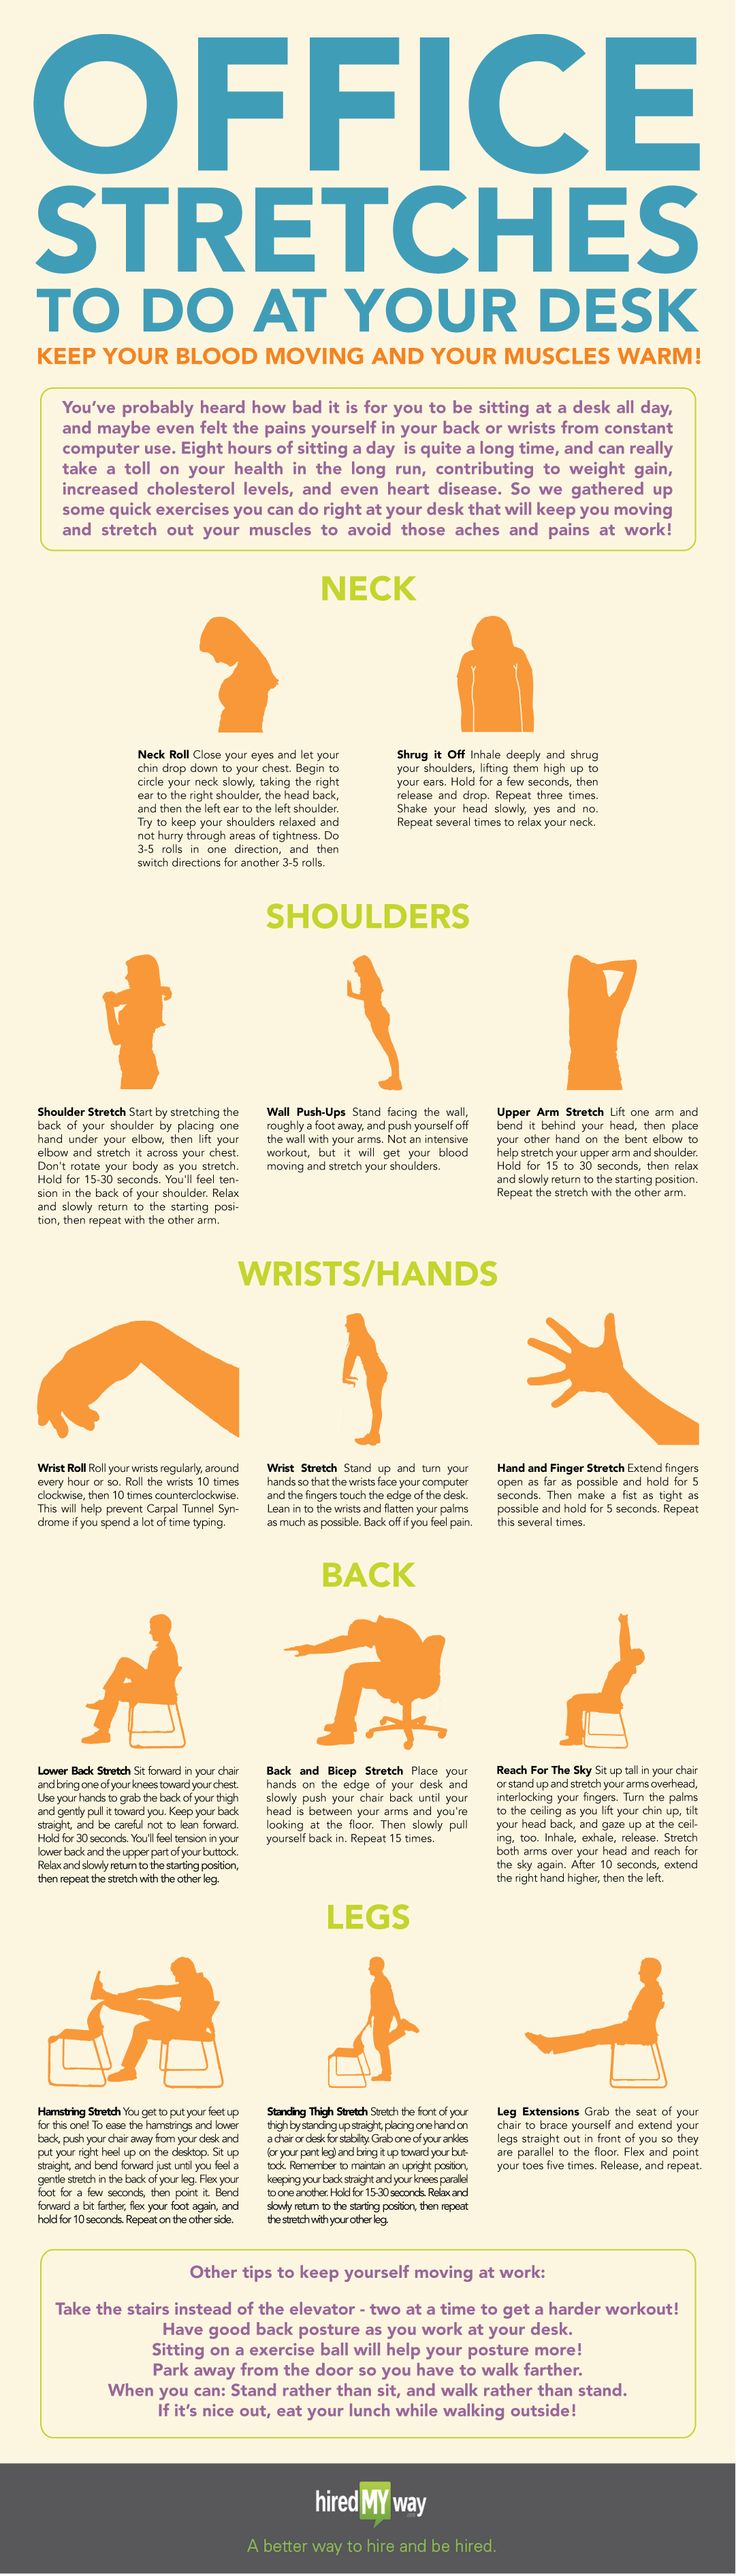 office stretches to do at desk